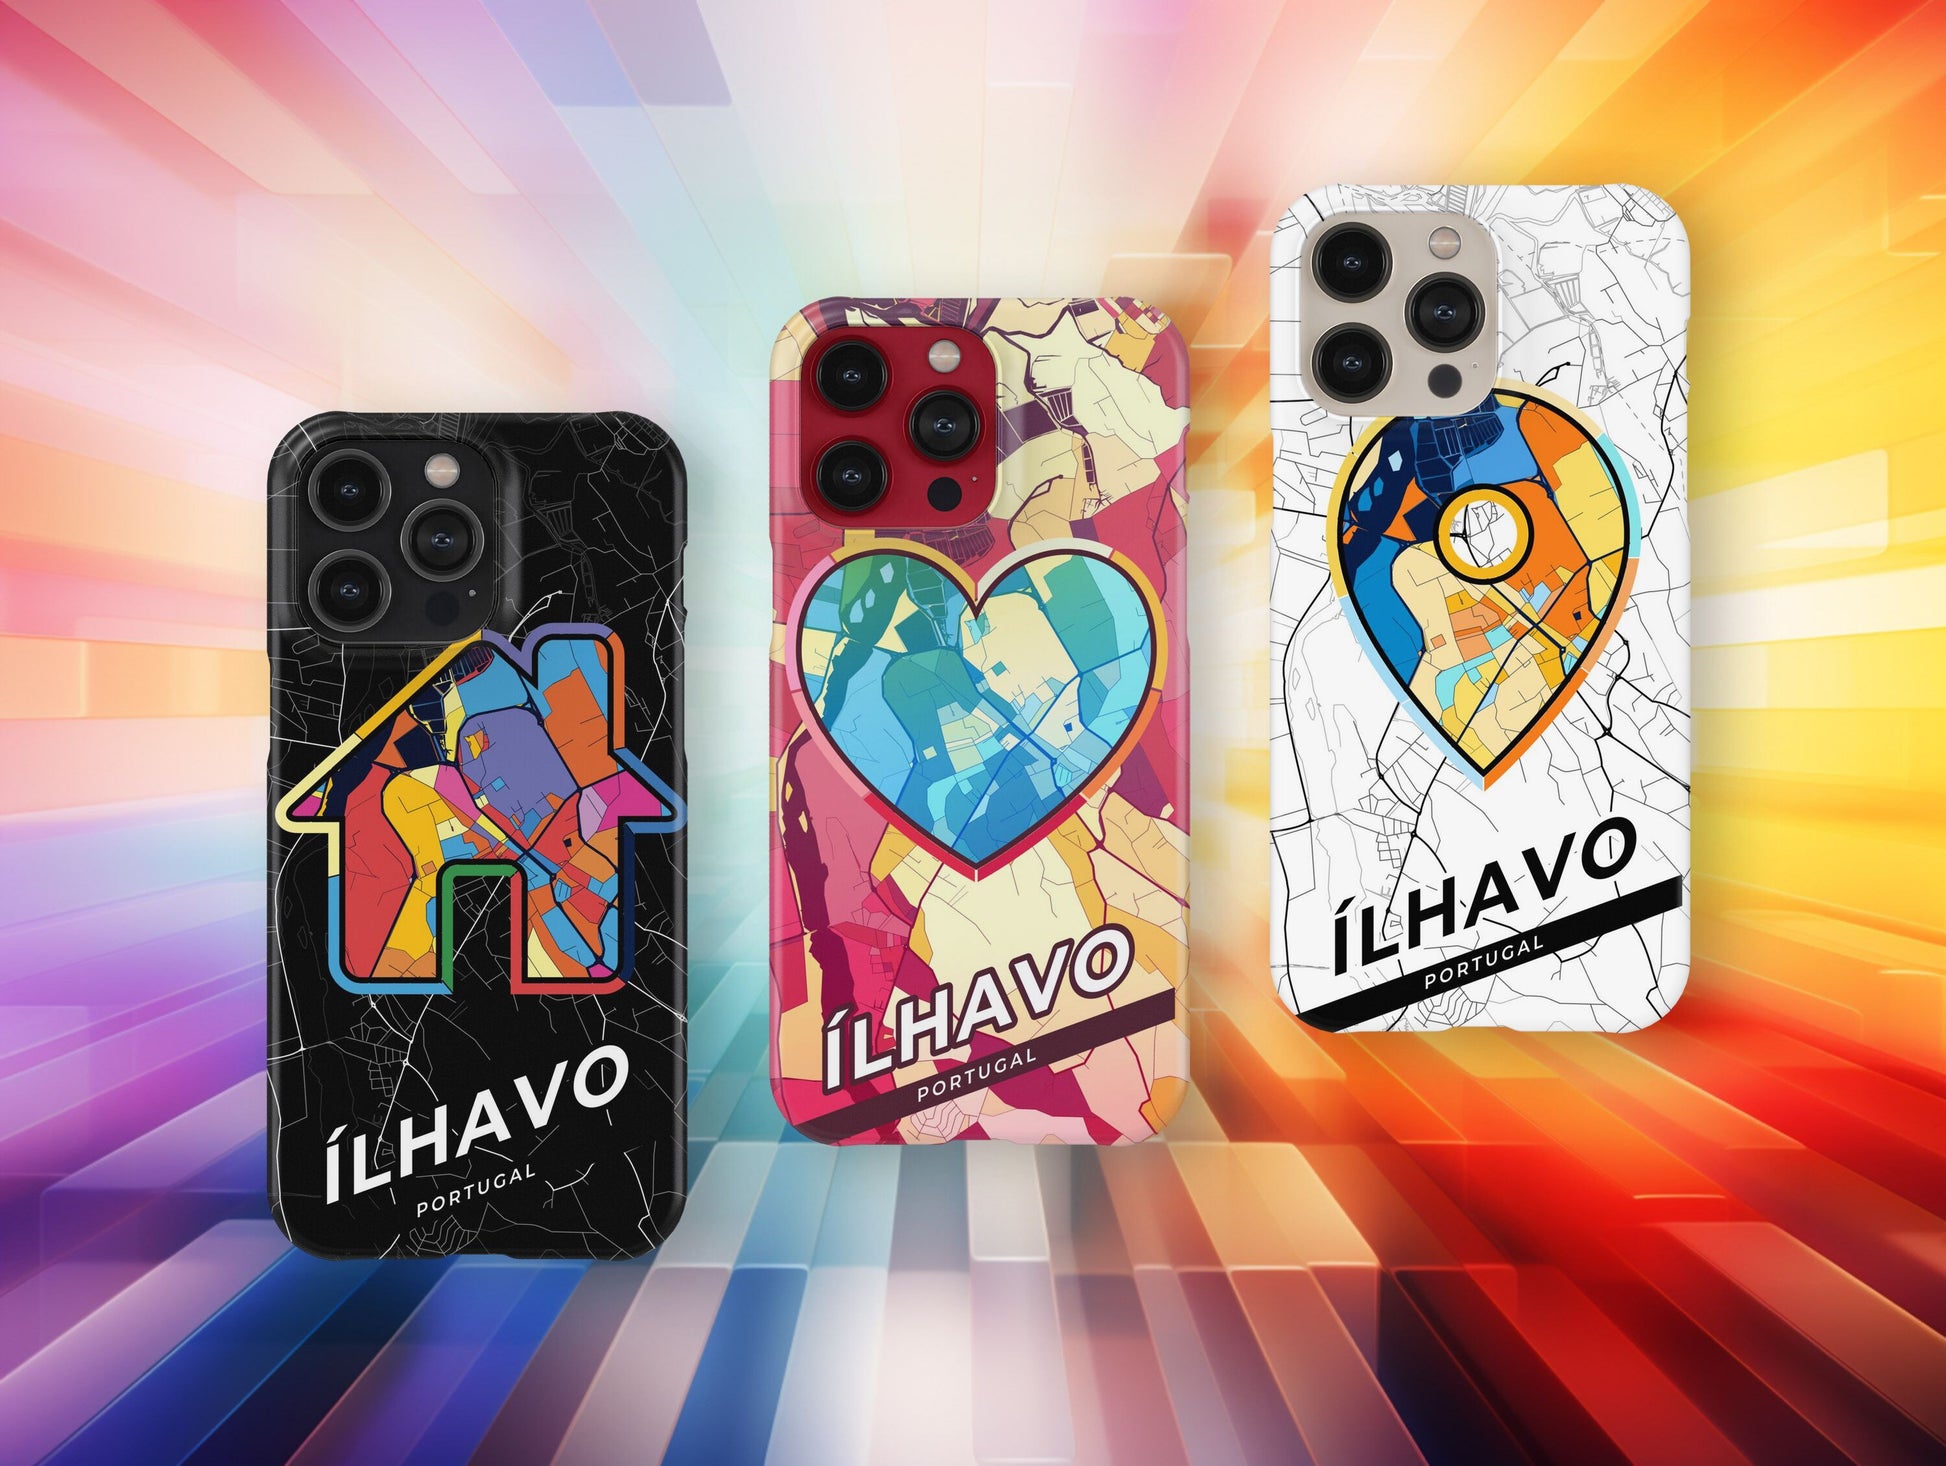 Ílhavo Portugal slim phone case with colorful icon. Birthday, wedding or housewarming gift. Couple match cases.